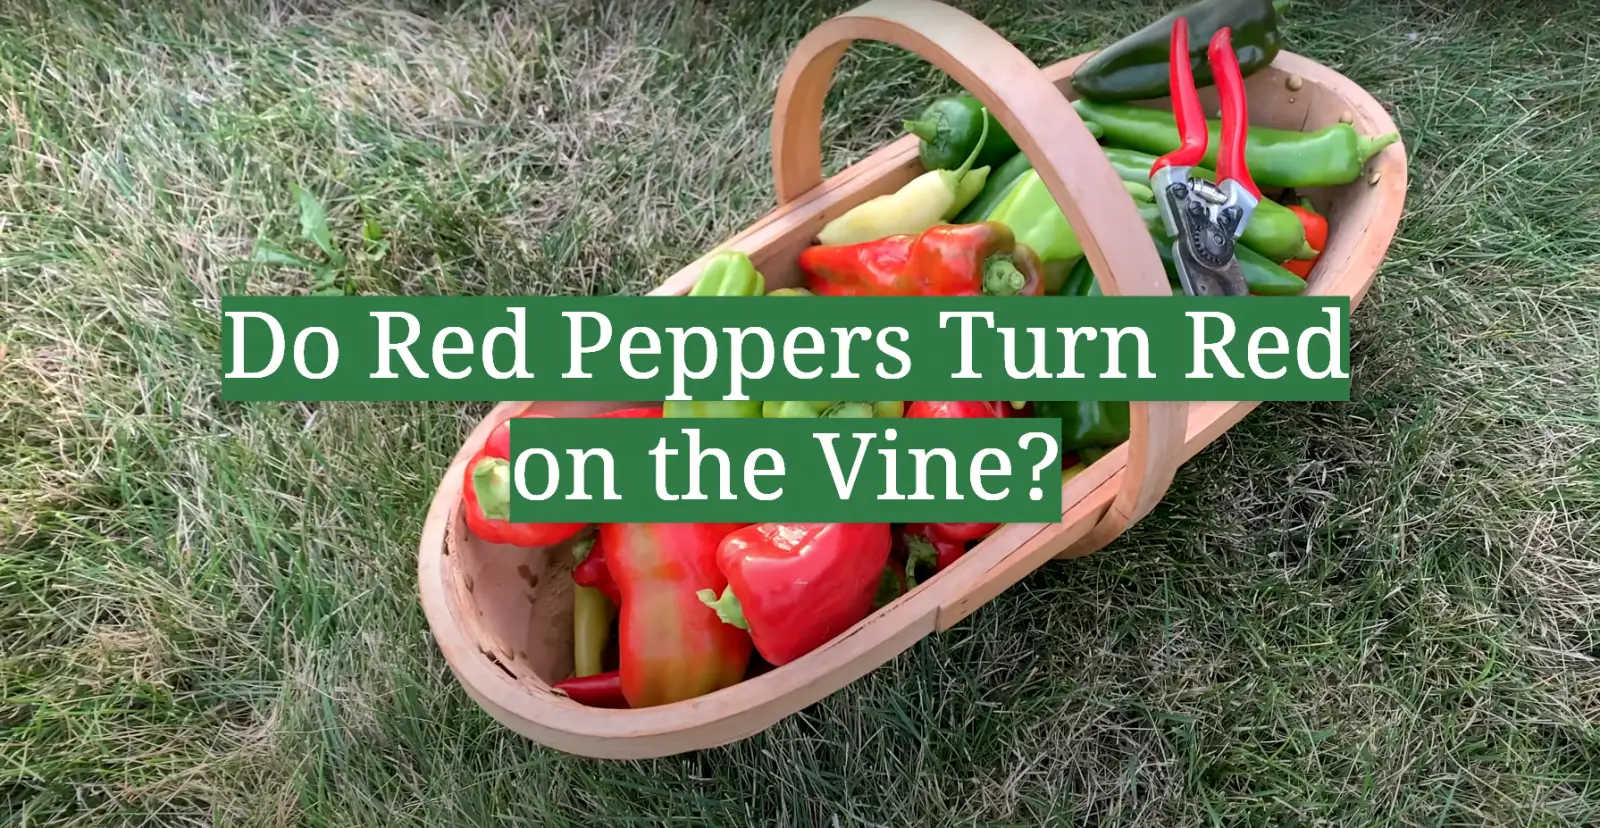 Do Red Peppers Turn Red on the Vine?